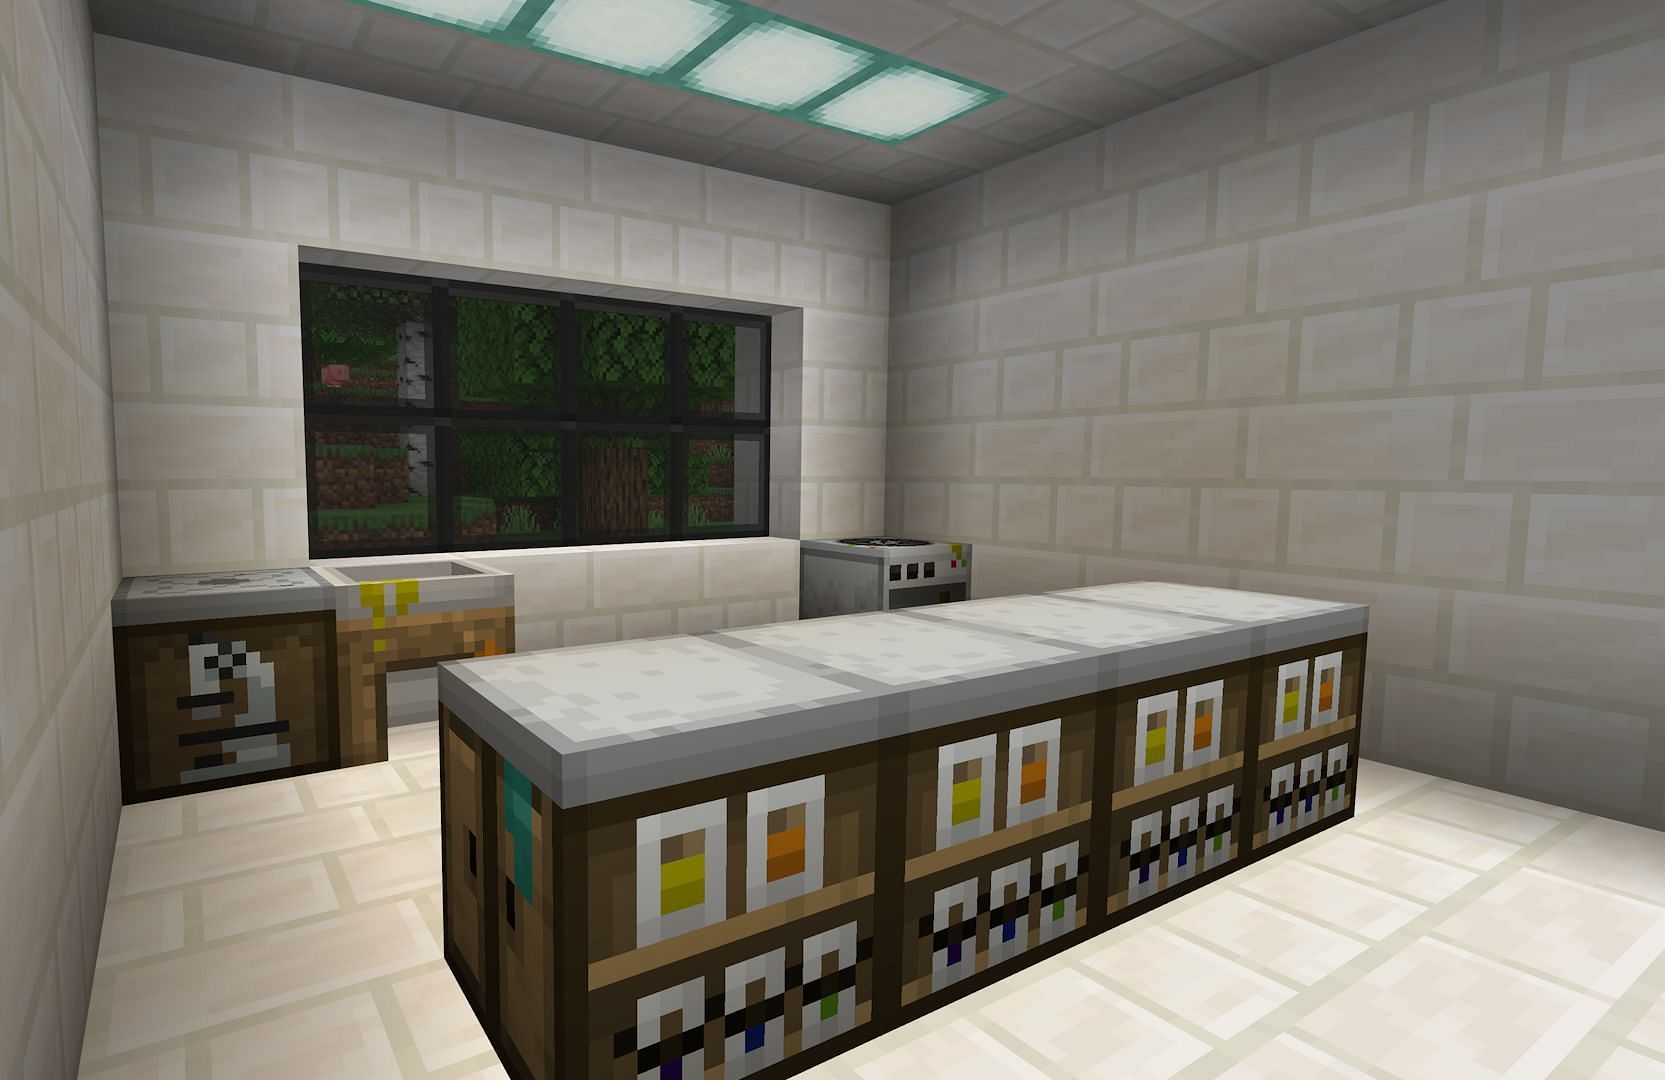 Vanilla Minecraft would have full science labs if Education Edition